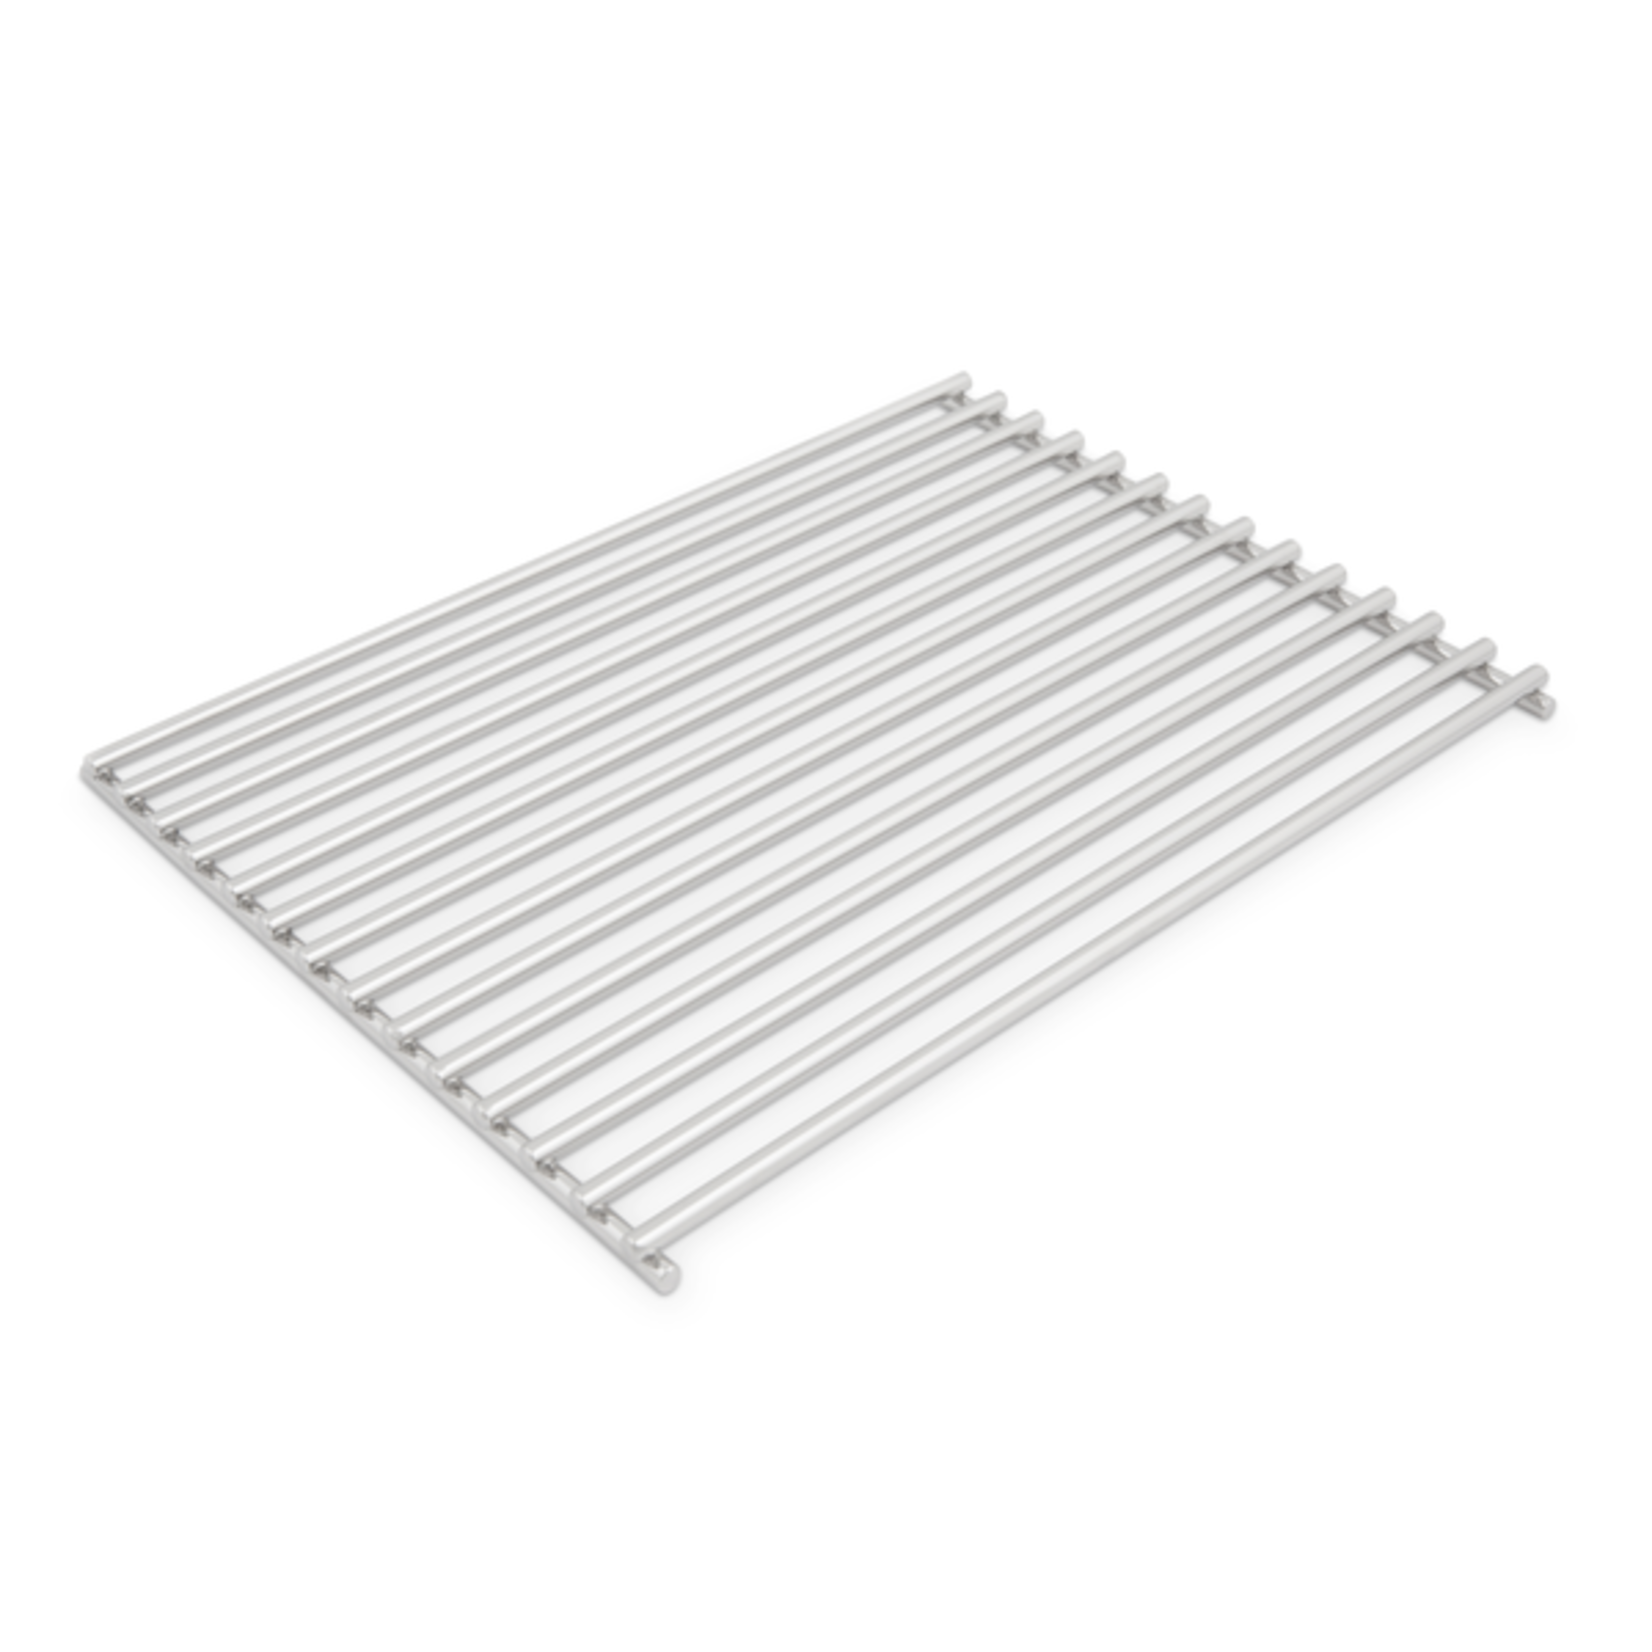 Broil King Cooking Grid - Monarch 300/Crown (T32) - Stainless Steel - 1 Piece